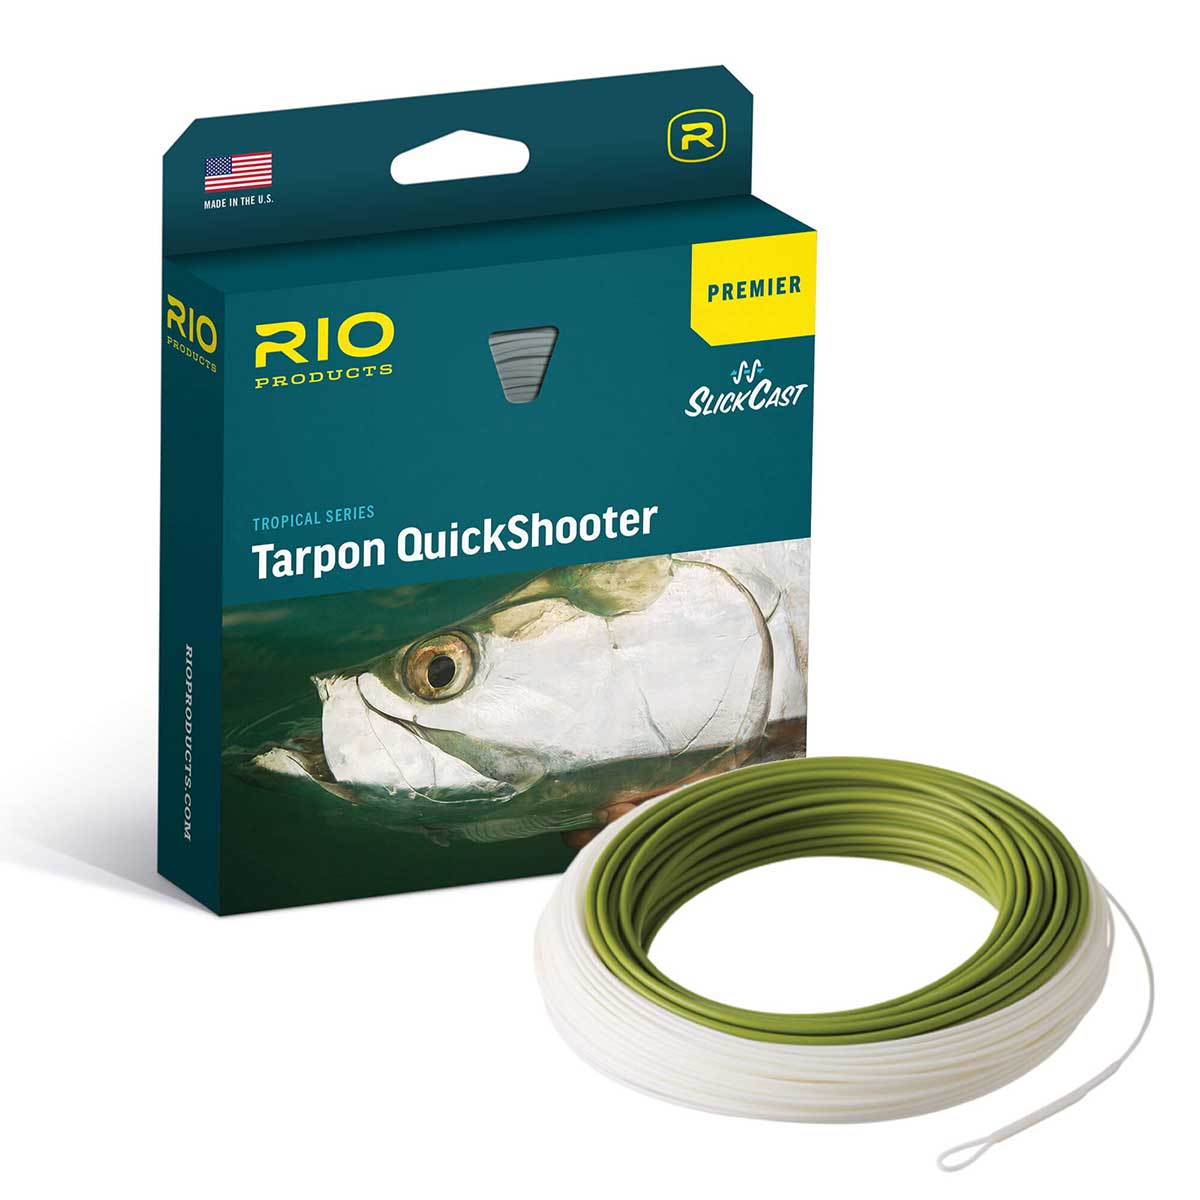 Rio Fly Lines - W. W. Doak and Sons Ltd. Fly Fishing Tackle, rio